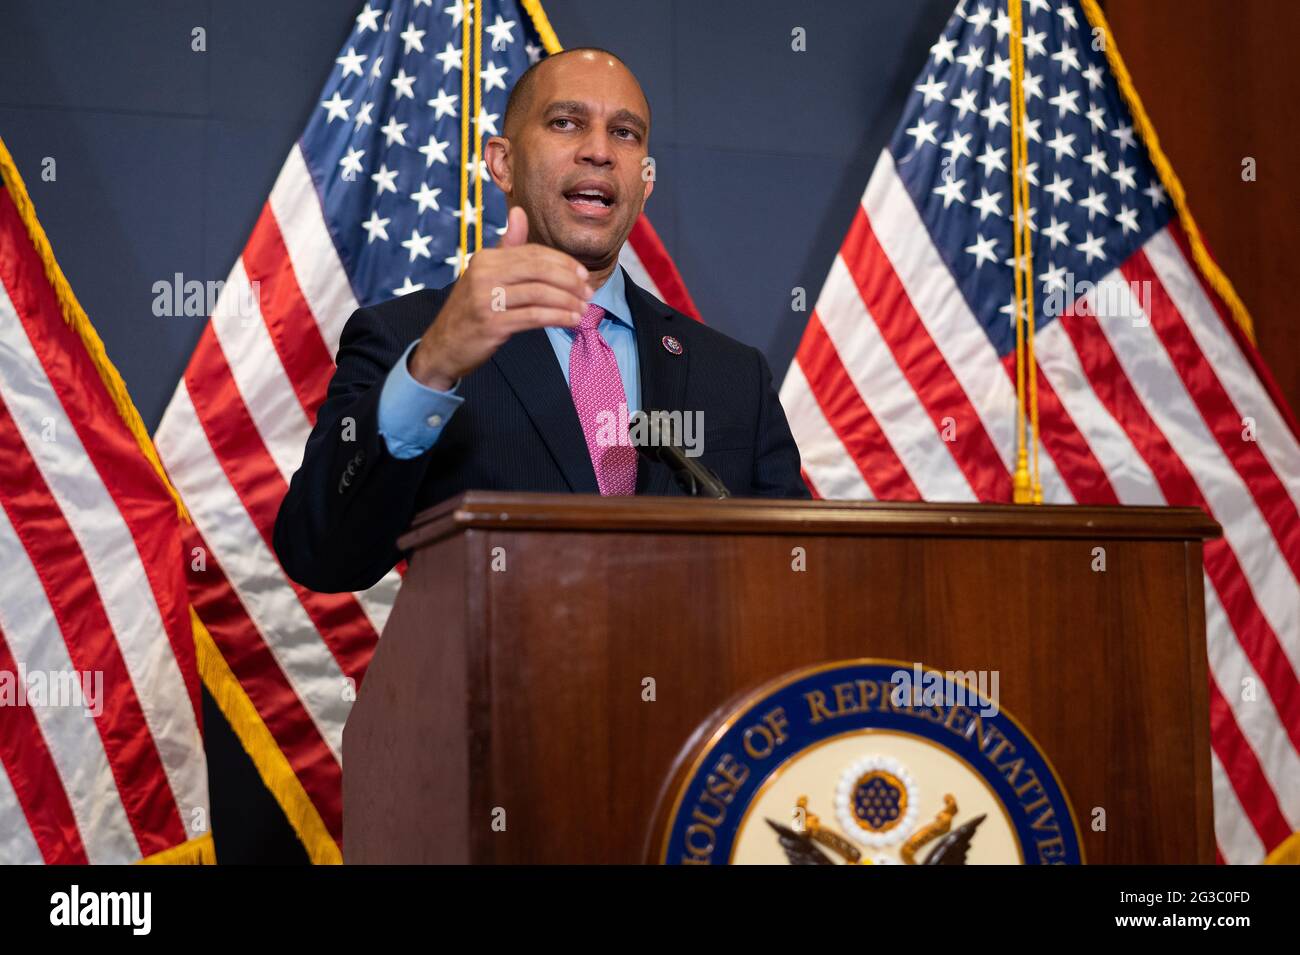 Washington, USA. 15th June, 2021. Representative Hakeem Jeffries (D-NY) during for a House Democrat Caucus press conference at the U.S. Capitol, in Washington, DC, on Tuesday, June 15, 2021. With new revelations emerging out of the growing Department of Justice scandal subpoenaing reporters and Members of Congress that started in the Trump Administration and ended under Biden, a House Committee has pledged an investigation as infrastructure negotiations continue in the Senate. (Graeme Sloan/Sipa USA) Credit: Sipa USA/Alamy Live News Stock Photo